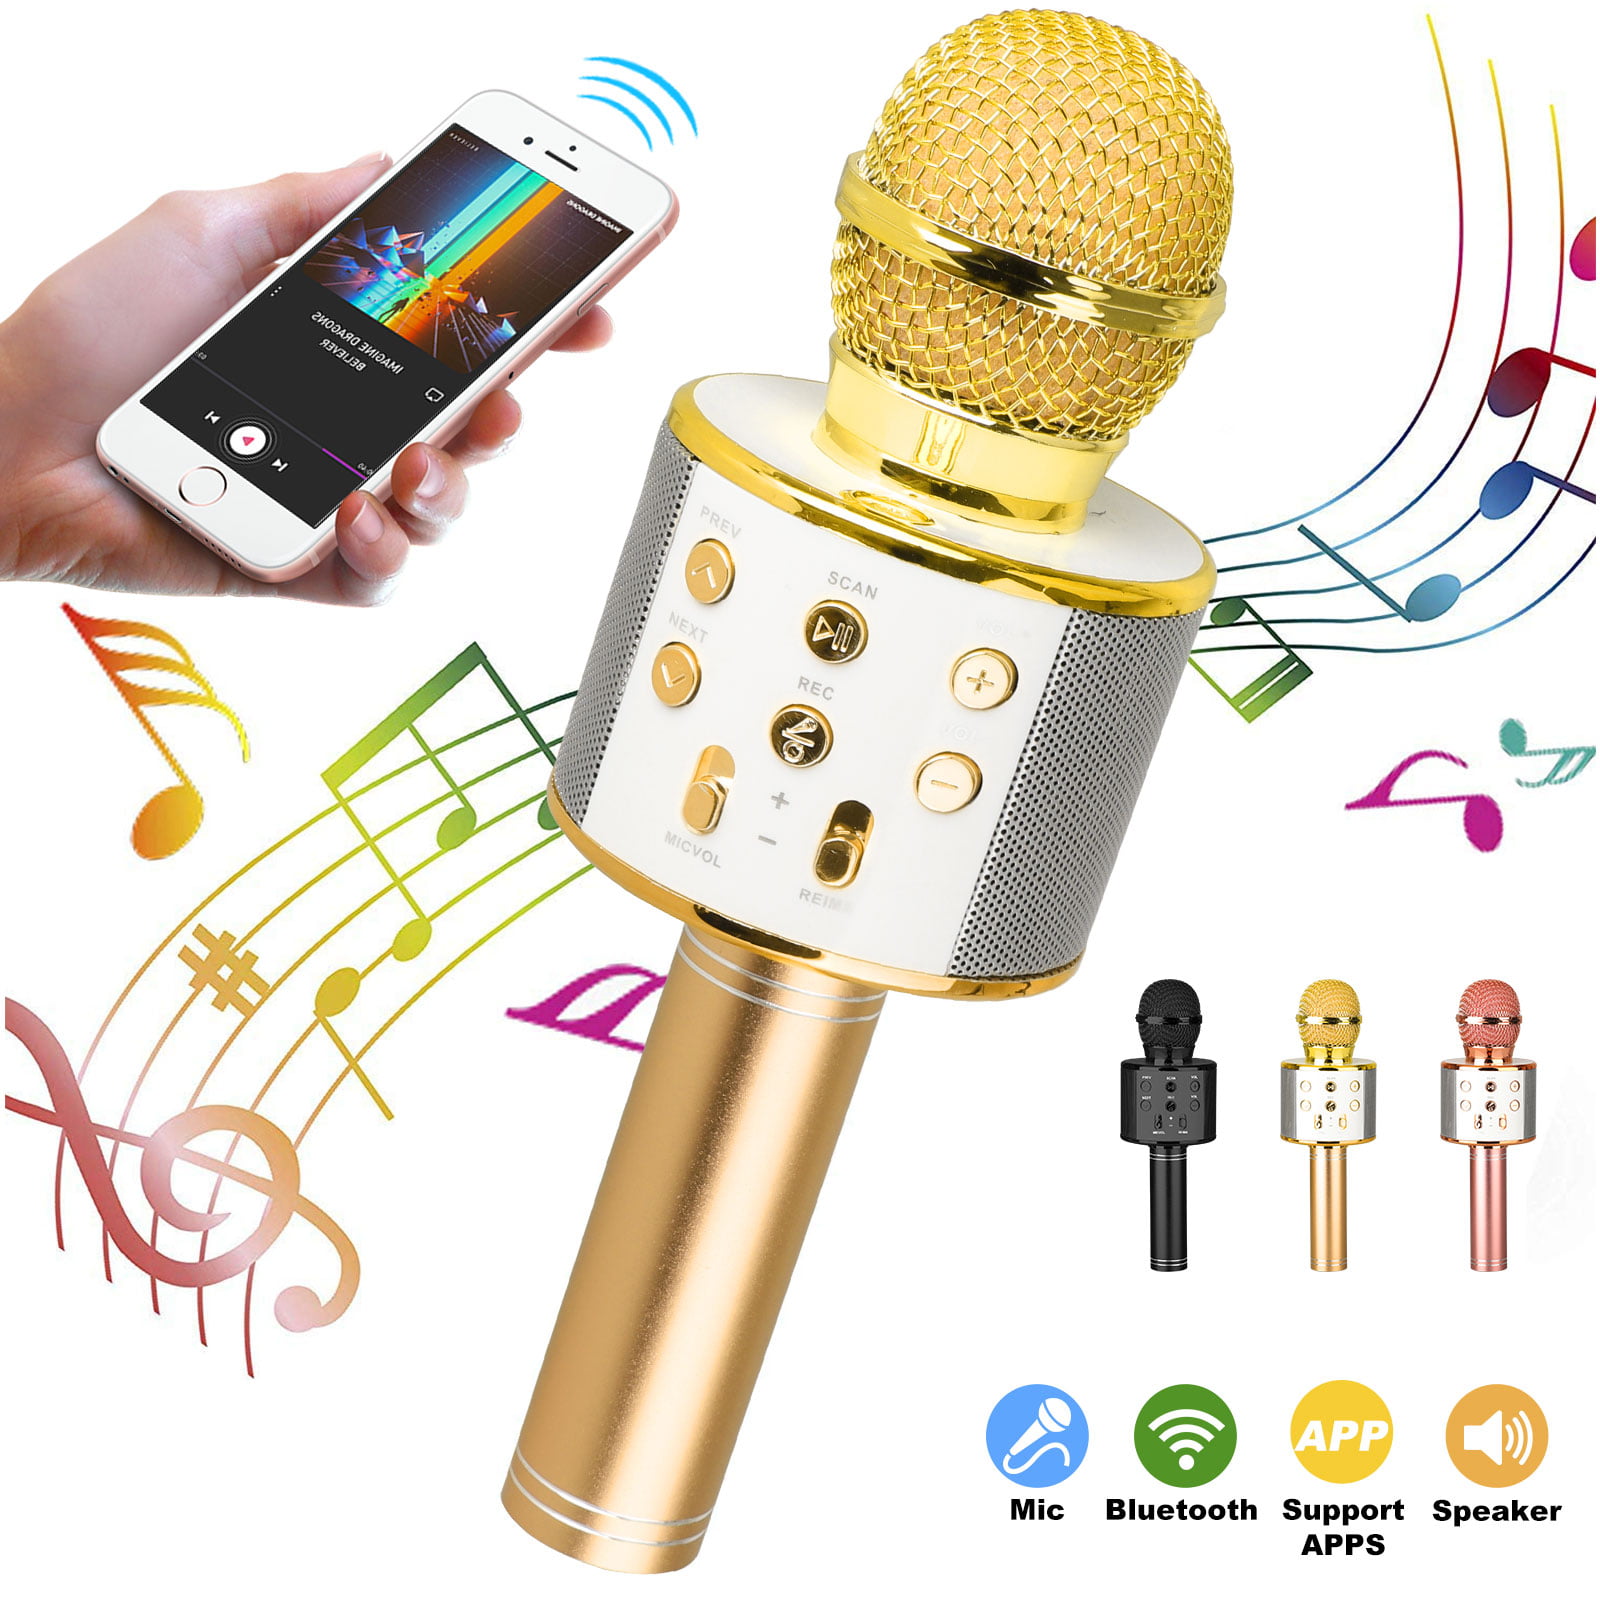 Wireless Karaoke Microphone,INSMART 4-in-1 Portable Handheld Karaoke Mic Karaoke Player Home Party Birthday Speaker Machine with Multi-Color LED Lights Compatible iPhone/Android/iPad/,Apple Watch,PC 